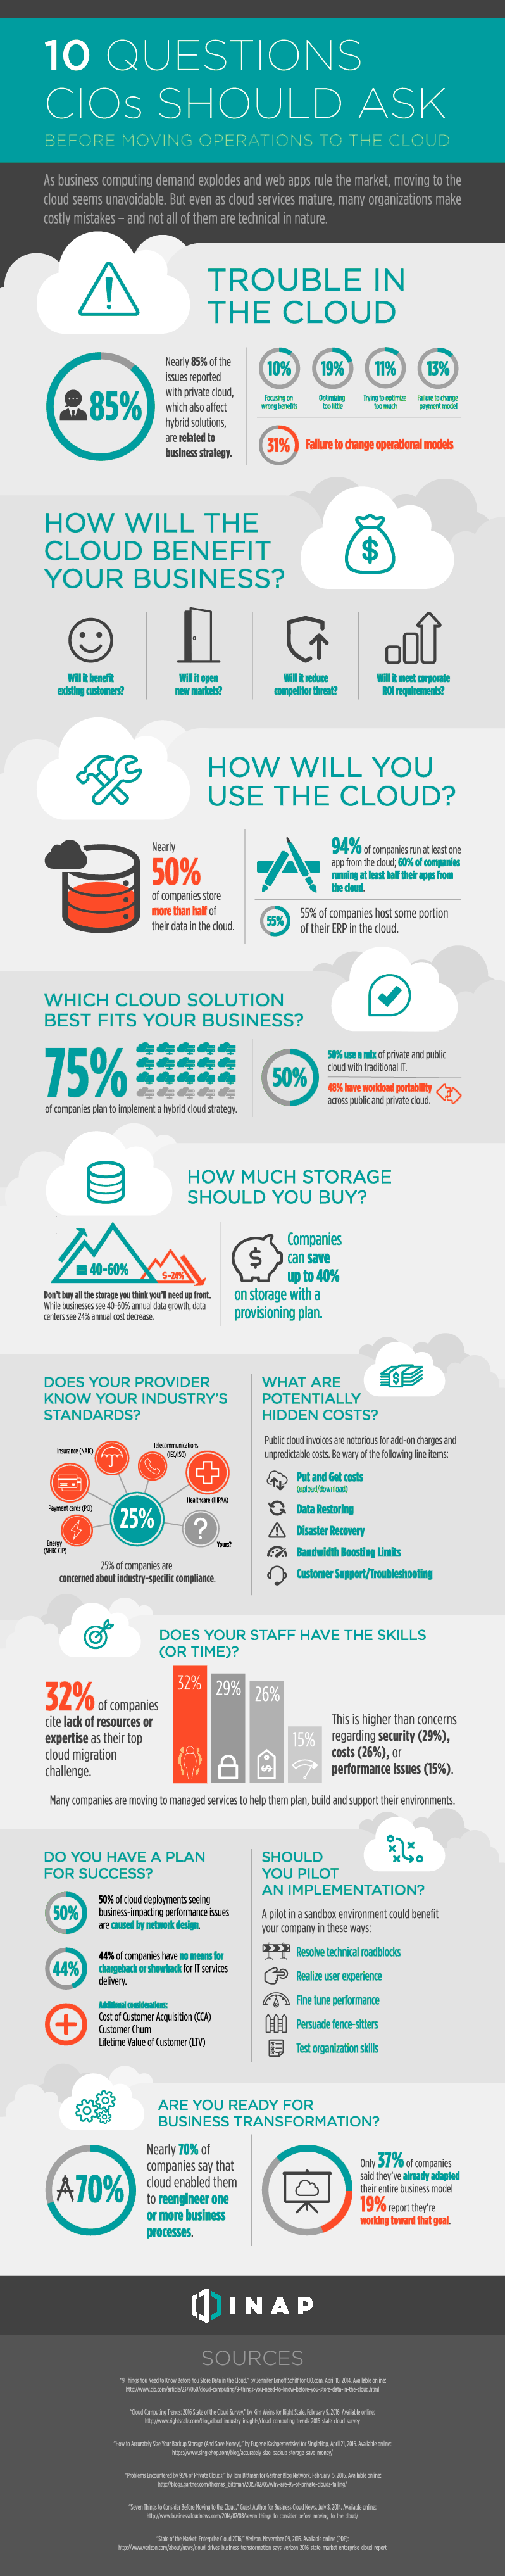 10 questions CIOs should ask before moving to the cloud